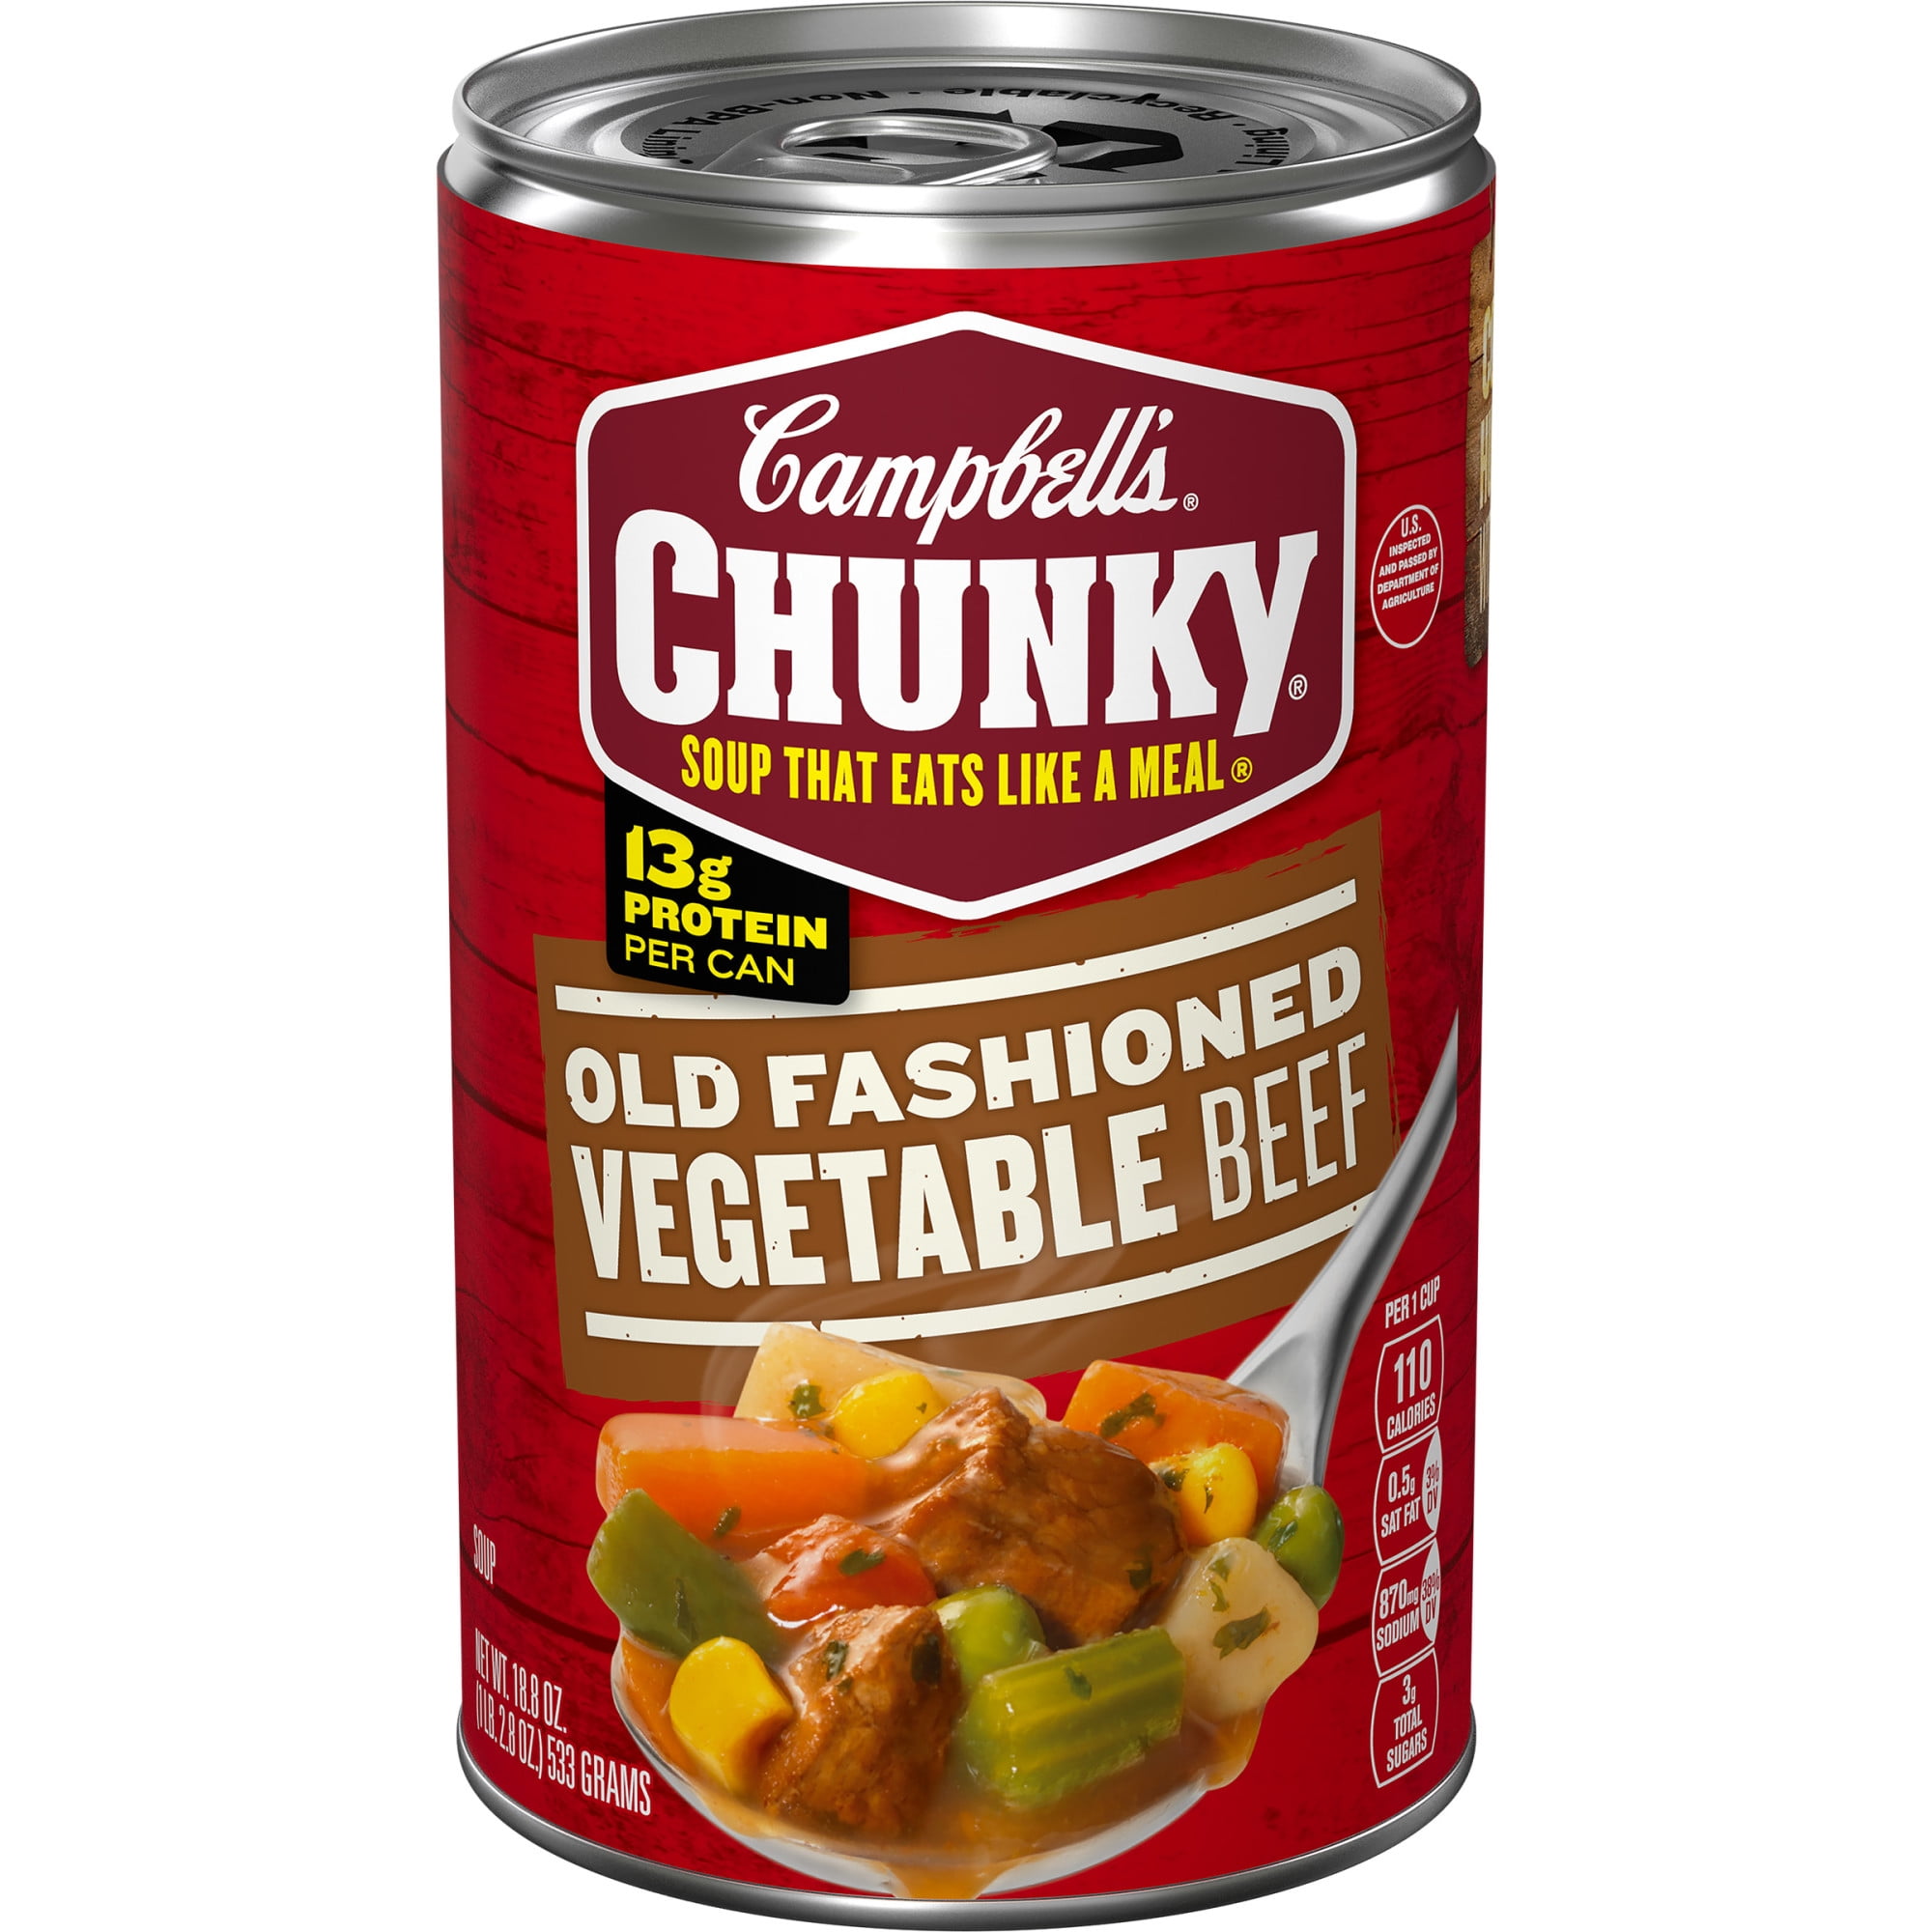 Campbells Chunky Soup, Ready to Serve Old Fashioned Vegetable Beef Soup, 18.8 Oz Can